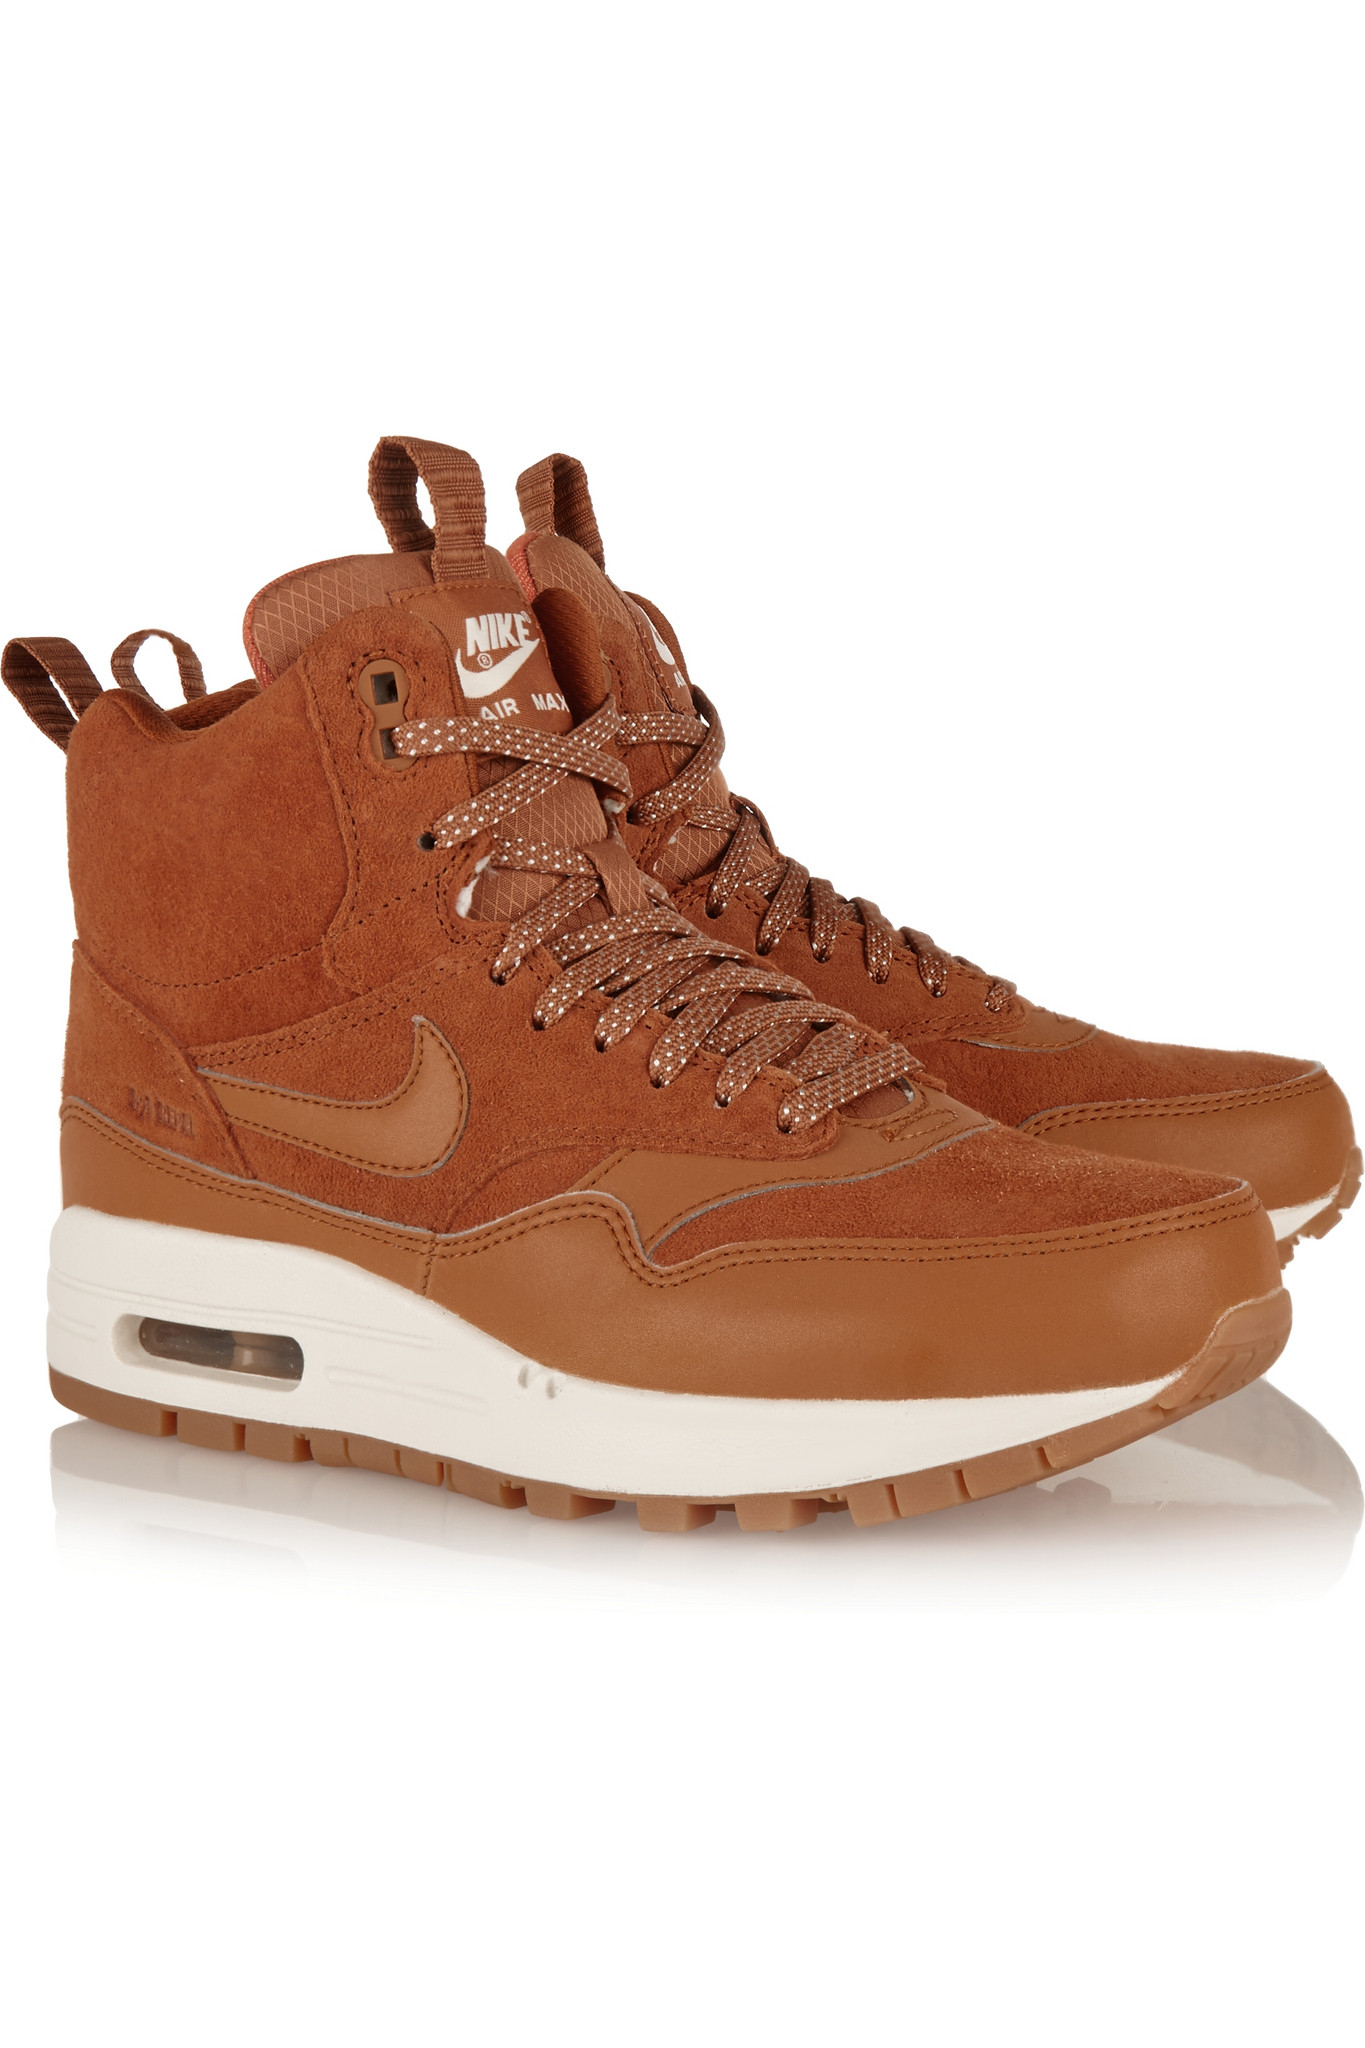 Nike - Air Max 1 Suede And Leather High-top Sneakers - Tan in Brown - Lyst